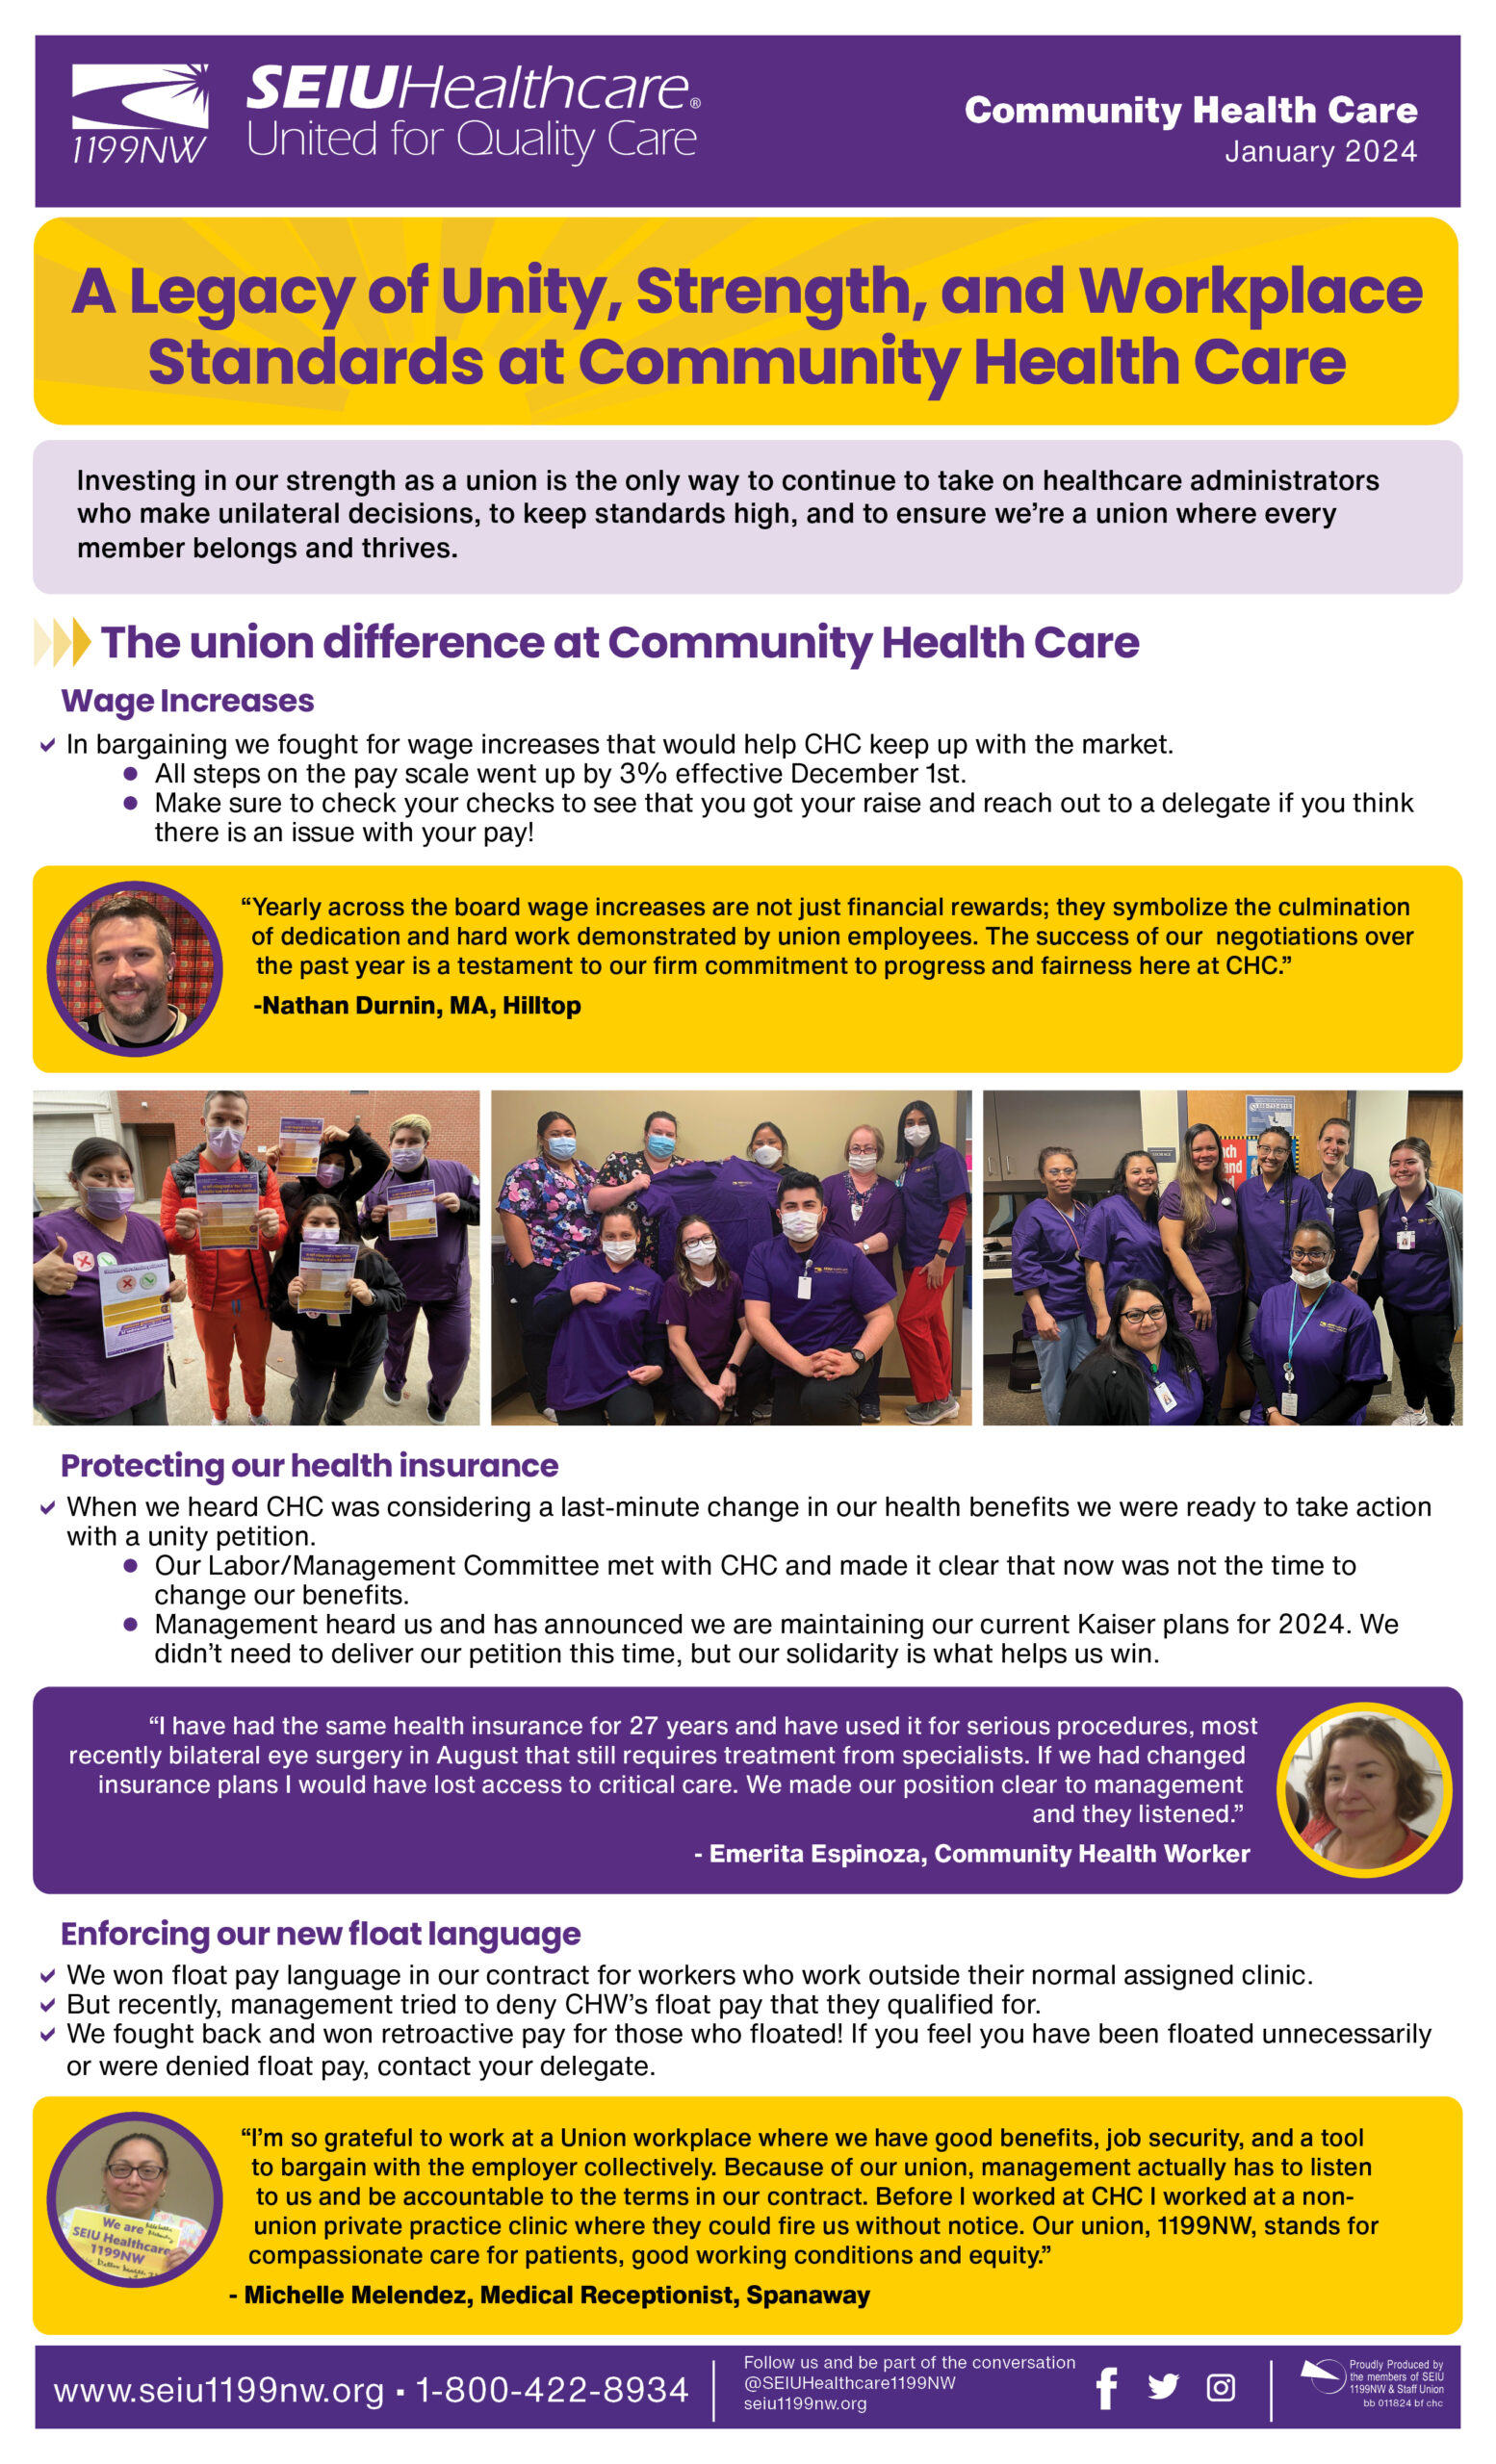 A Legacy of Unity, Strength, and Workplace Standards at Community Health Care